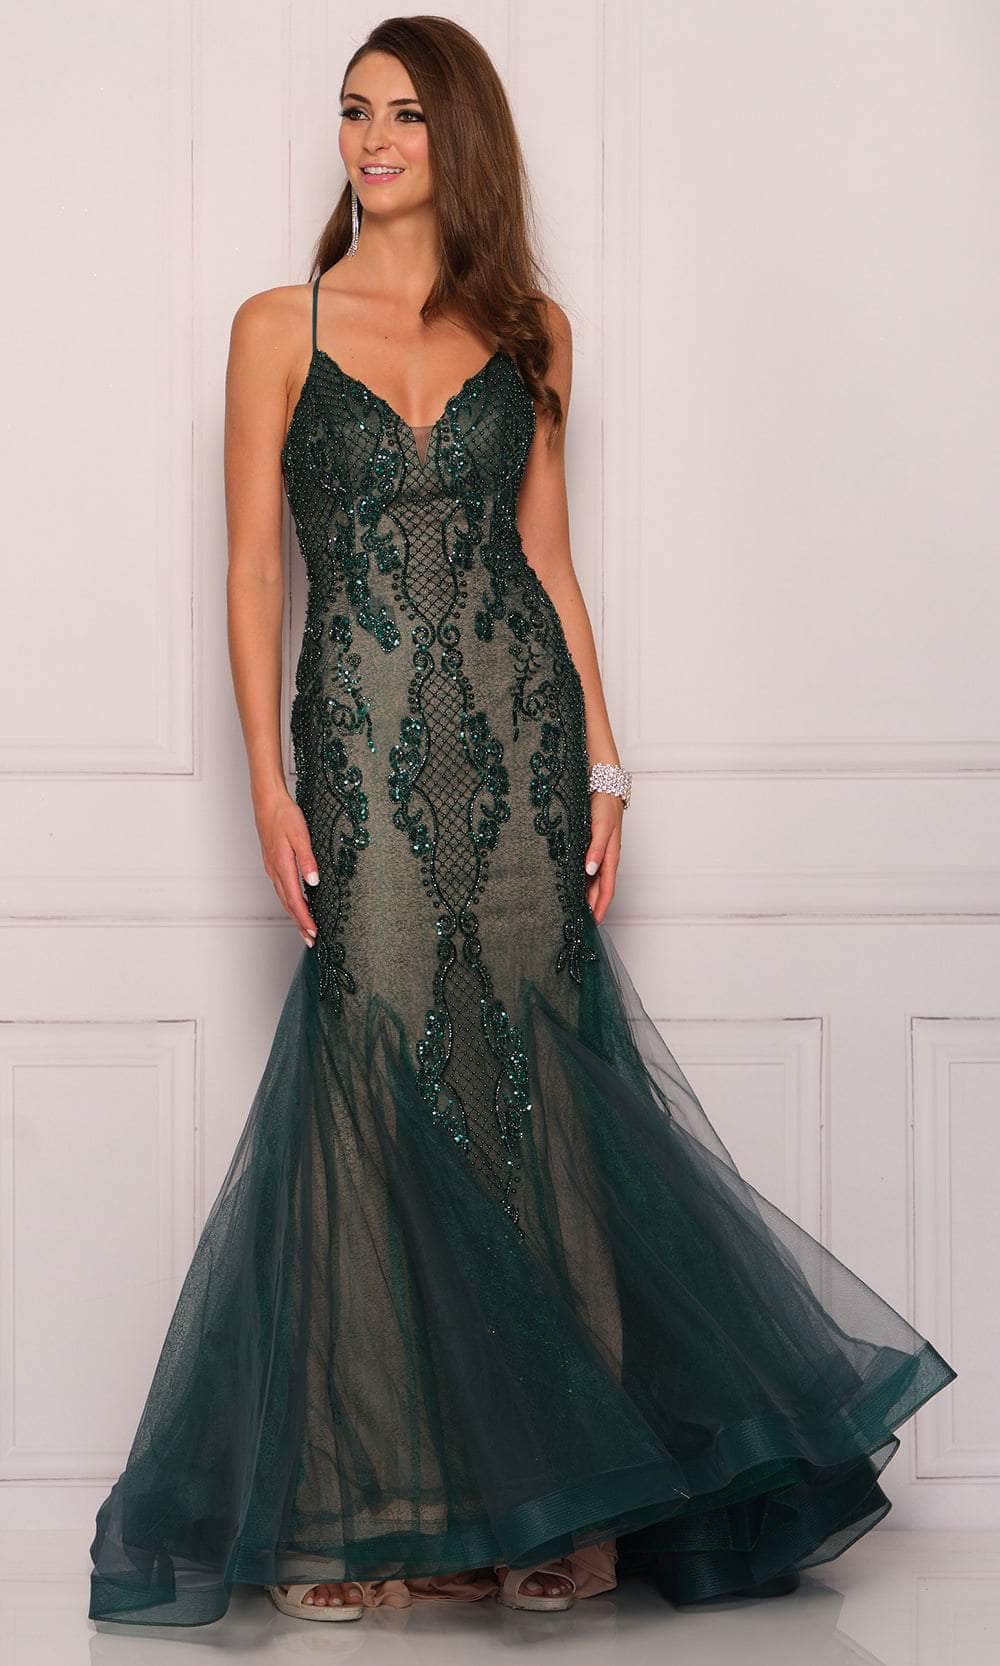 Image of Dave & Johnny 11092 - Strappy Back Mermaid Prom Gown